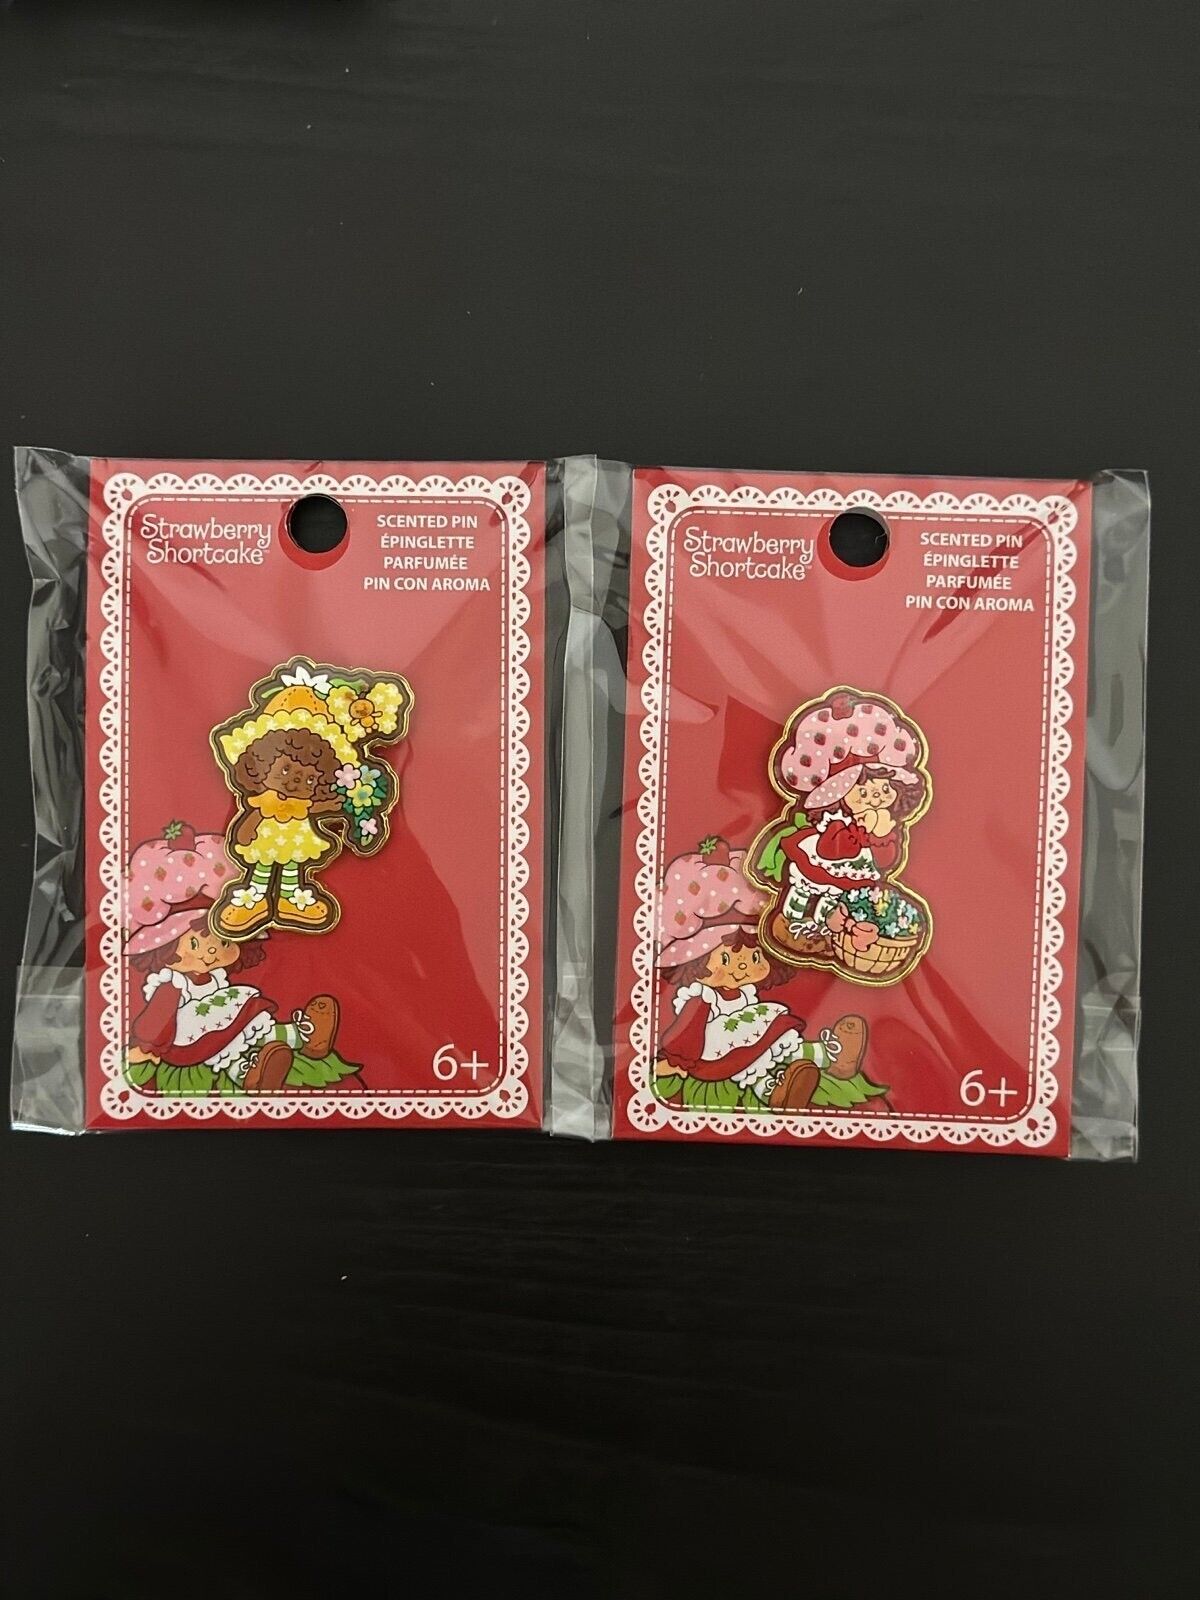 Loungefly Strawberry Shortcake and Orange Blossom Scented Pin Set